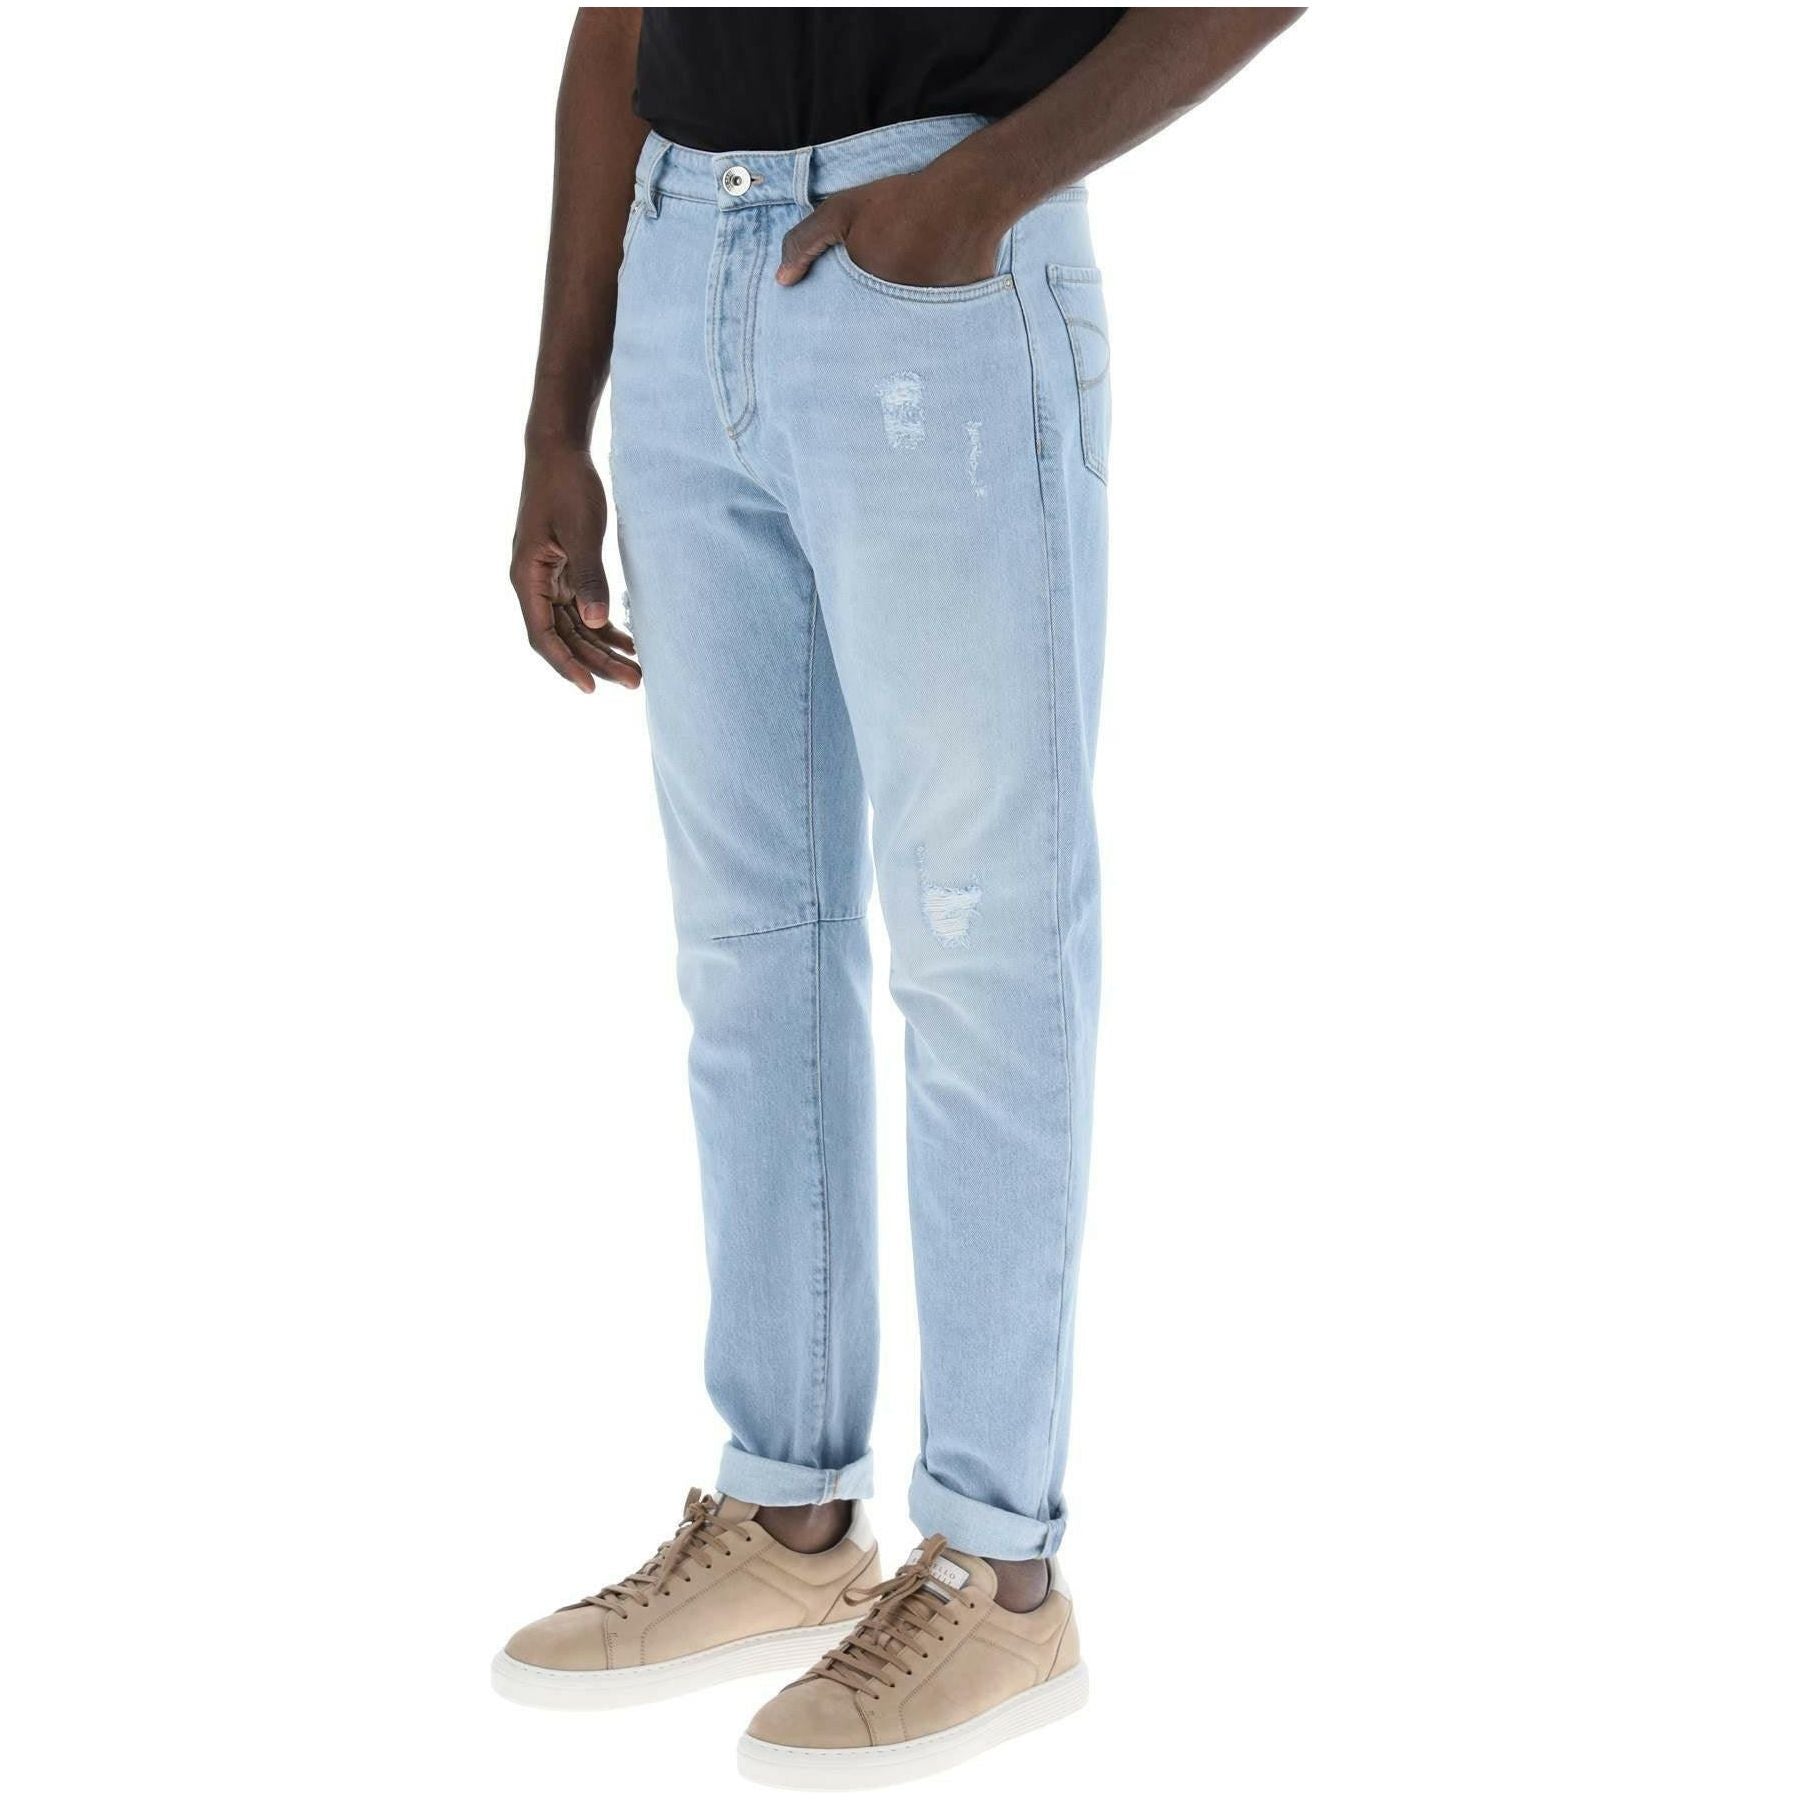 Blue Leisure Fit Cotton Jeans With Tapered Cut BRUNELLO CUCINELLI JOHN JULIA.